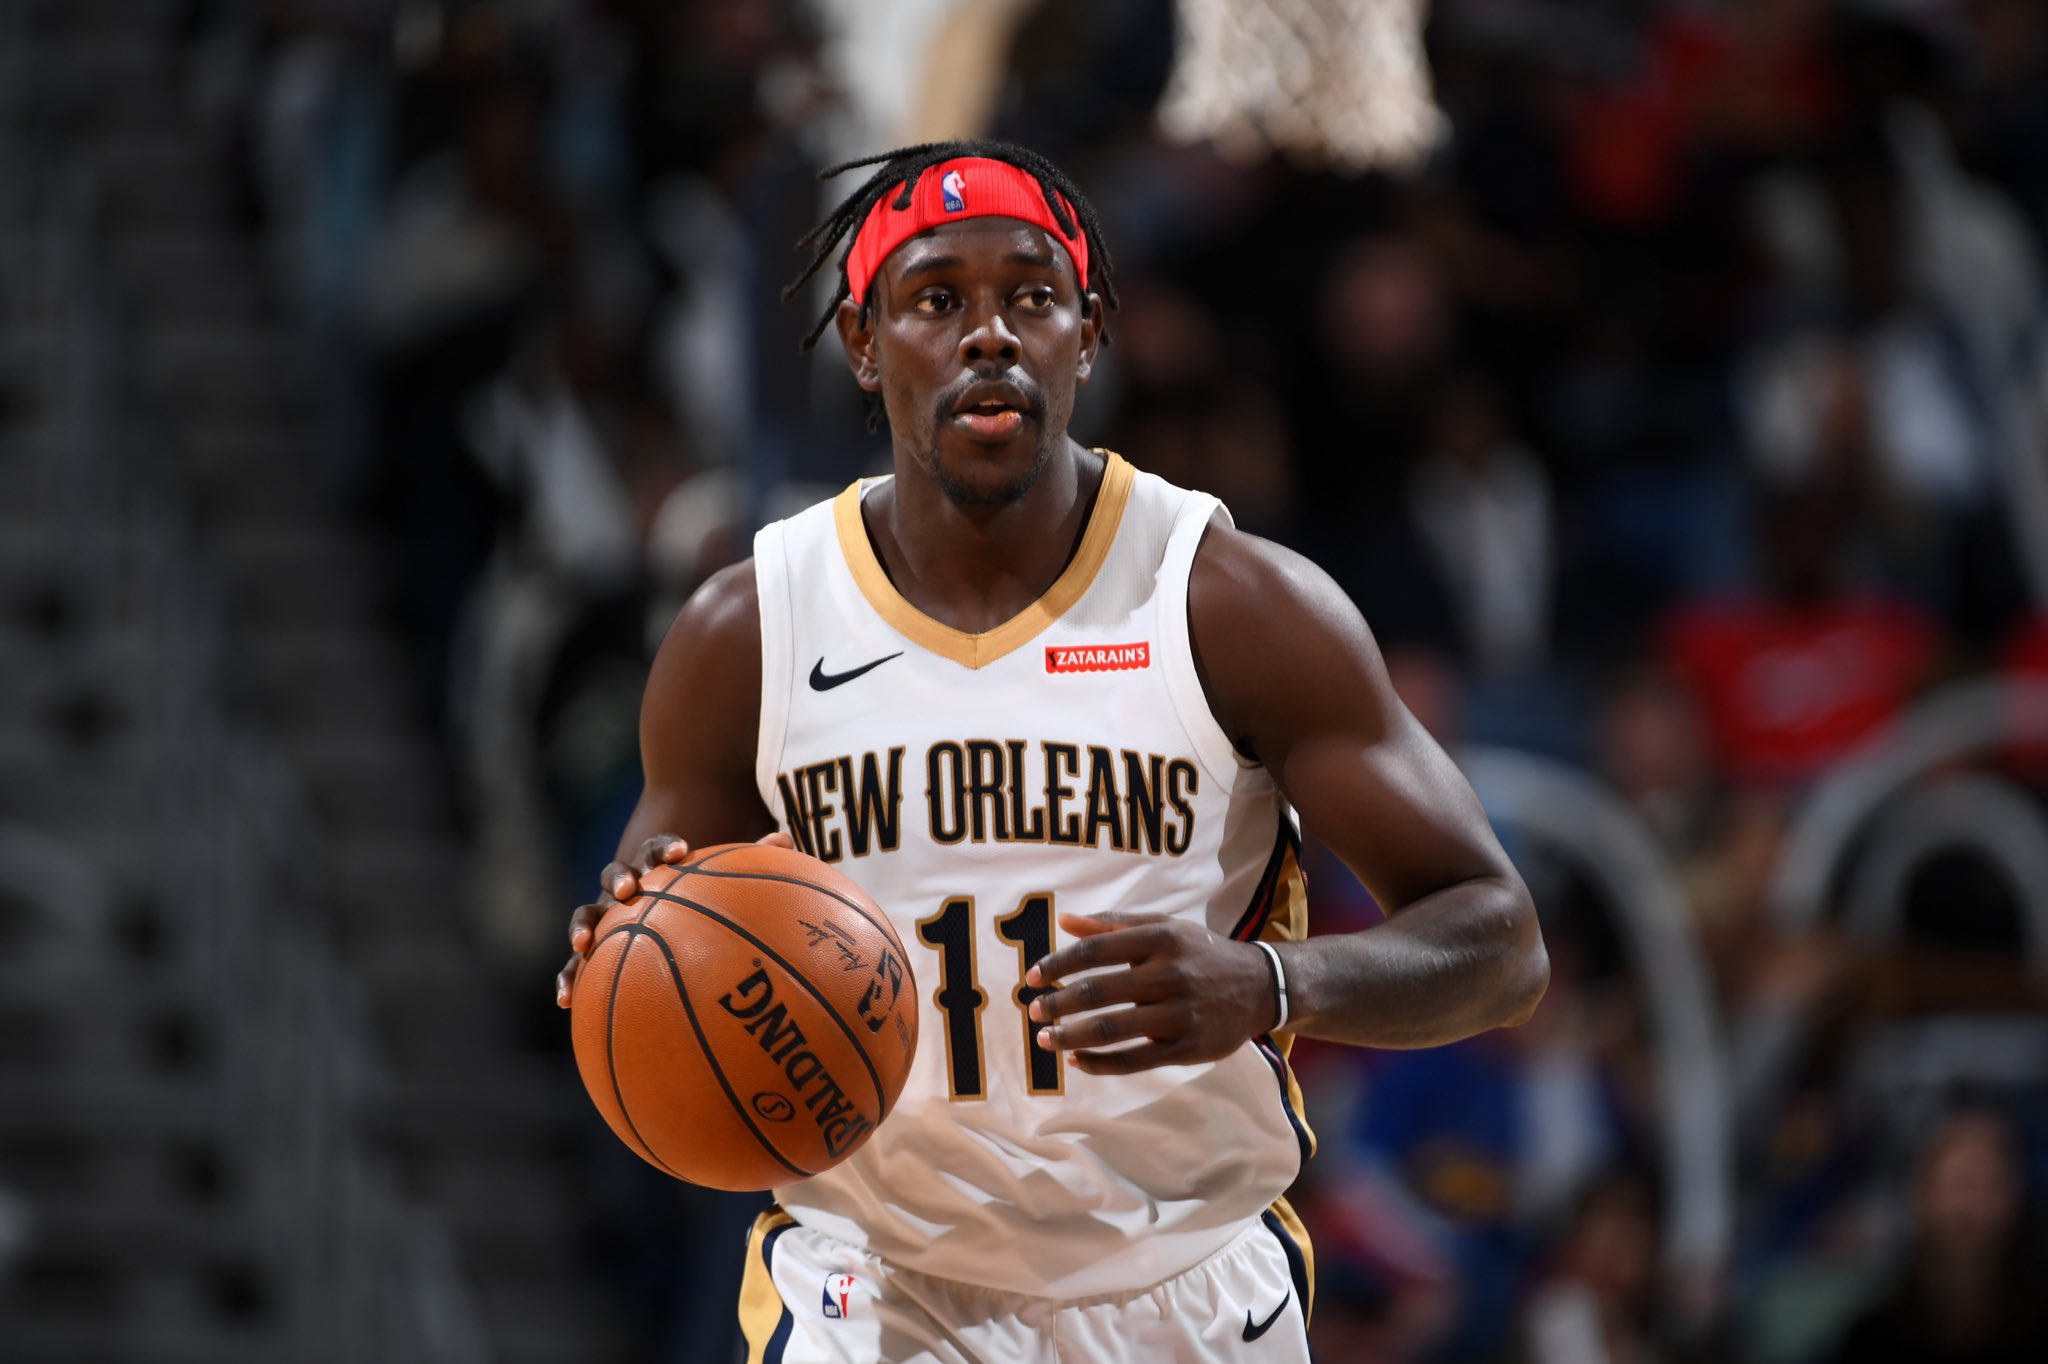 The New Orleans Pelicans should retire Jrue Holiday's number